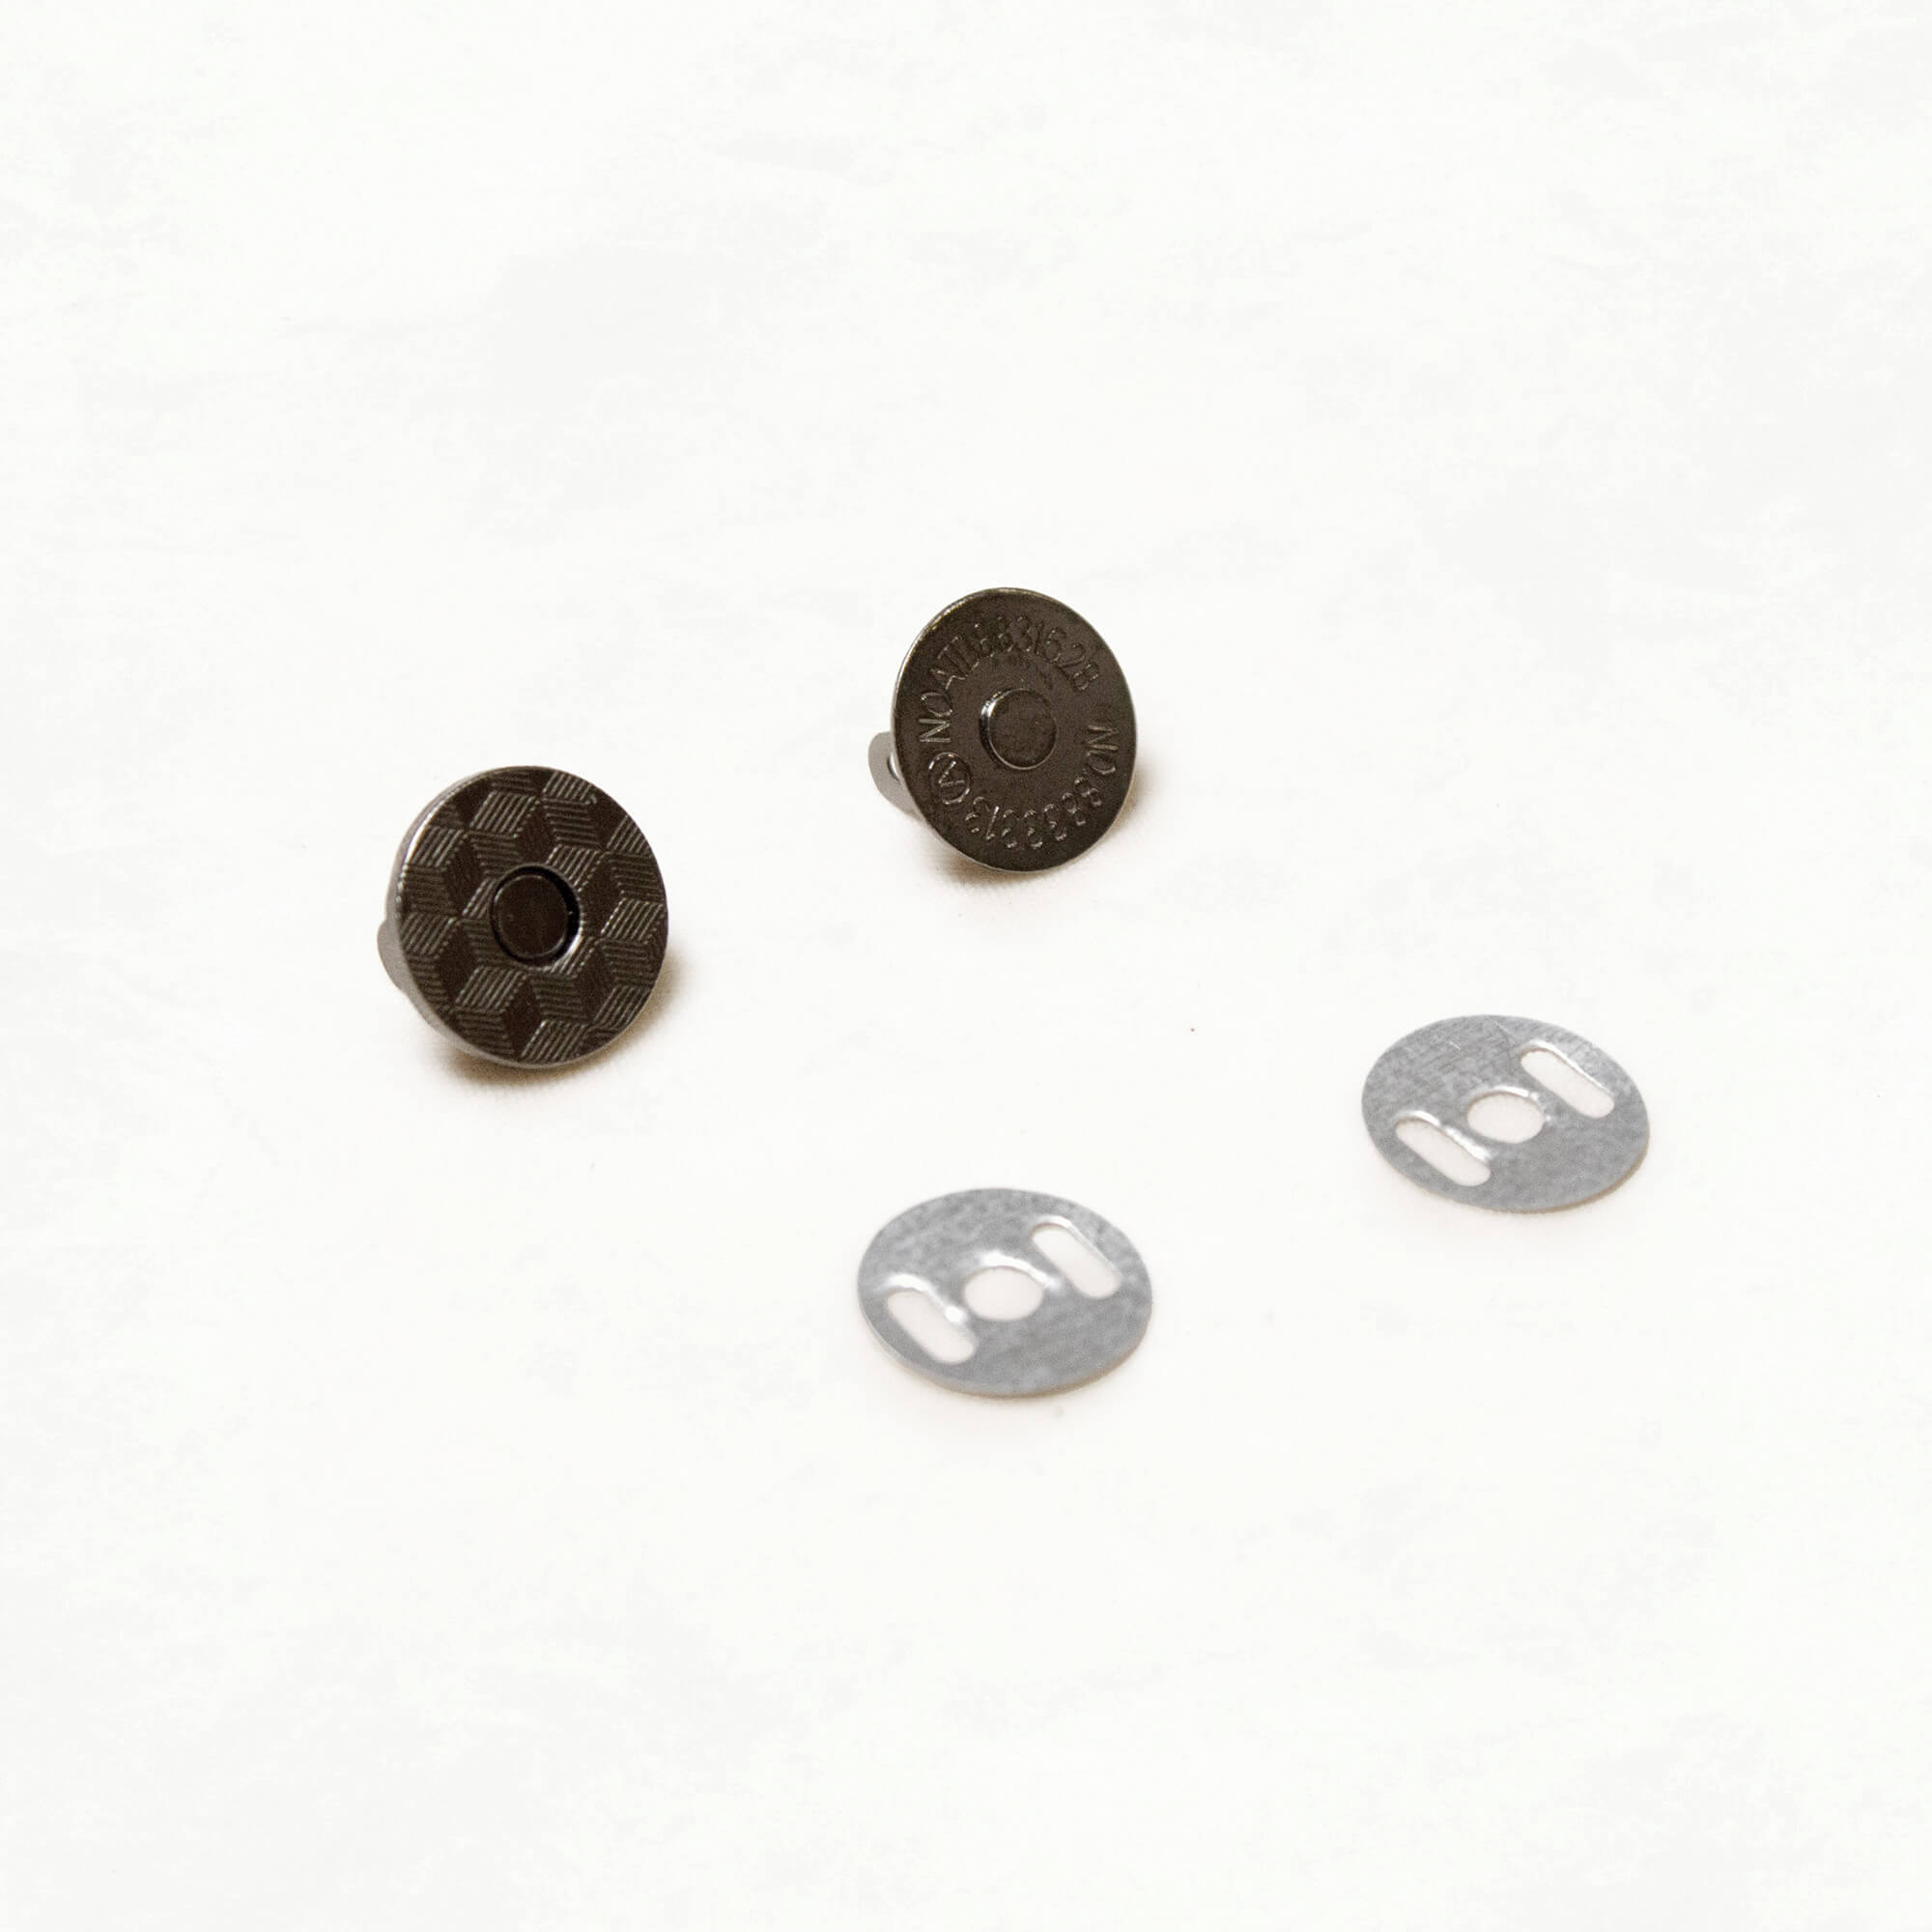 18mm Nickel Super Thin Magnetic Snaps/Closures / Buttons - 10 Sets